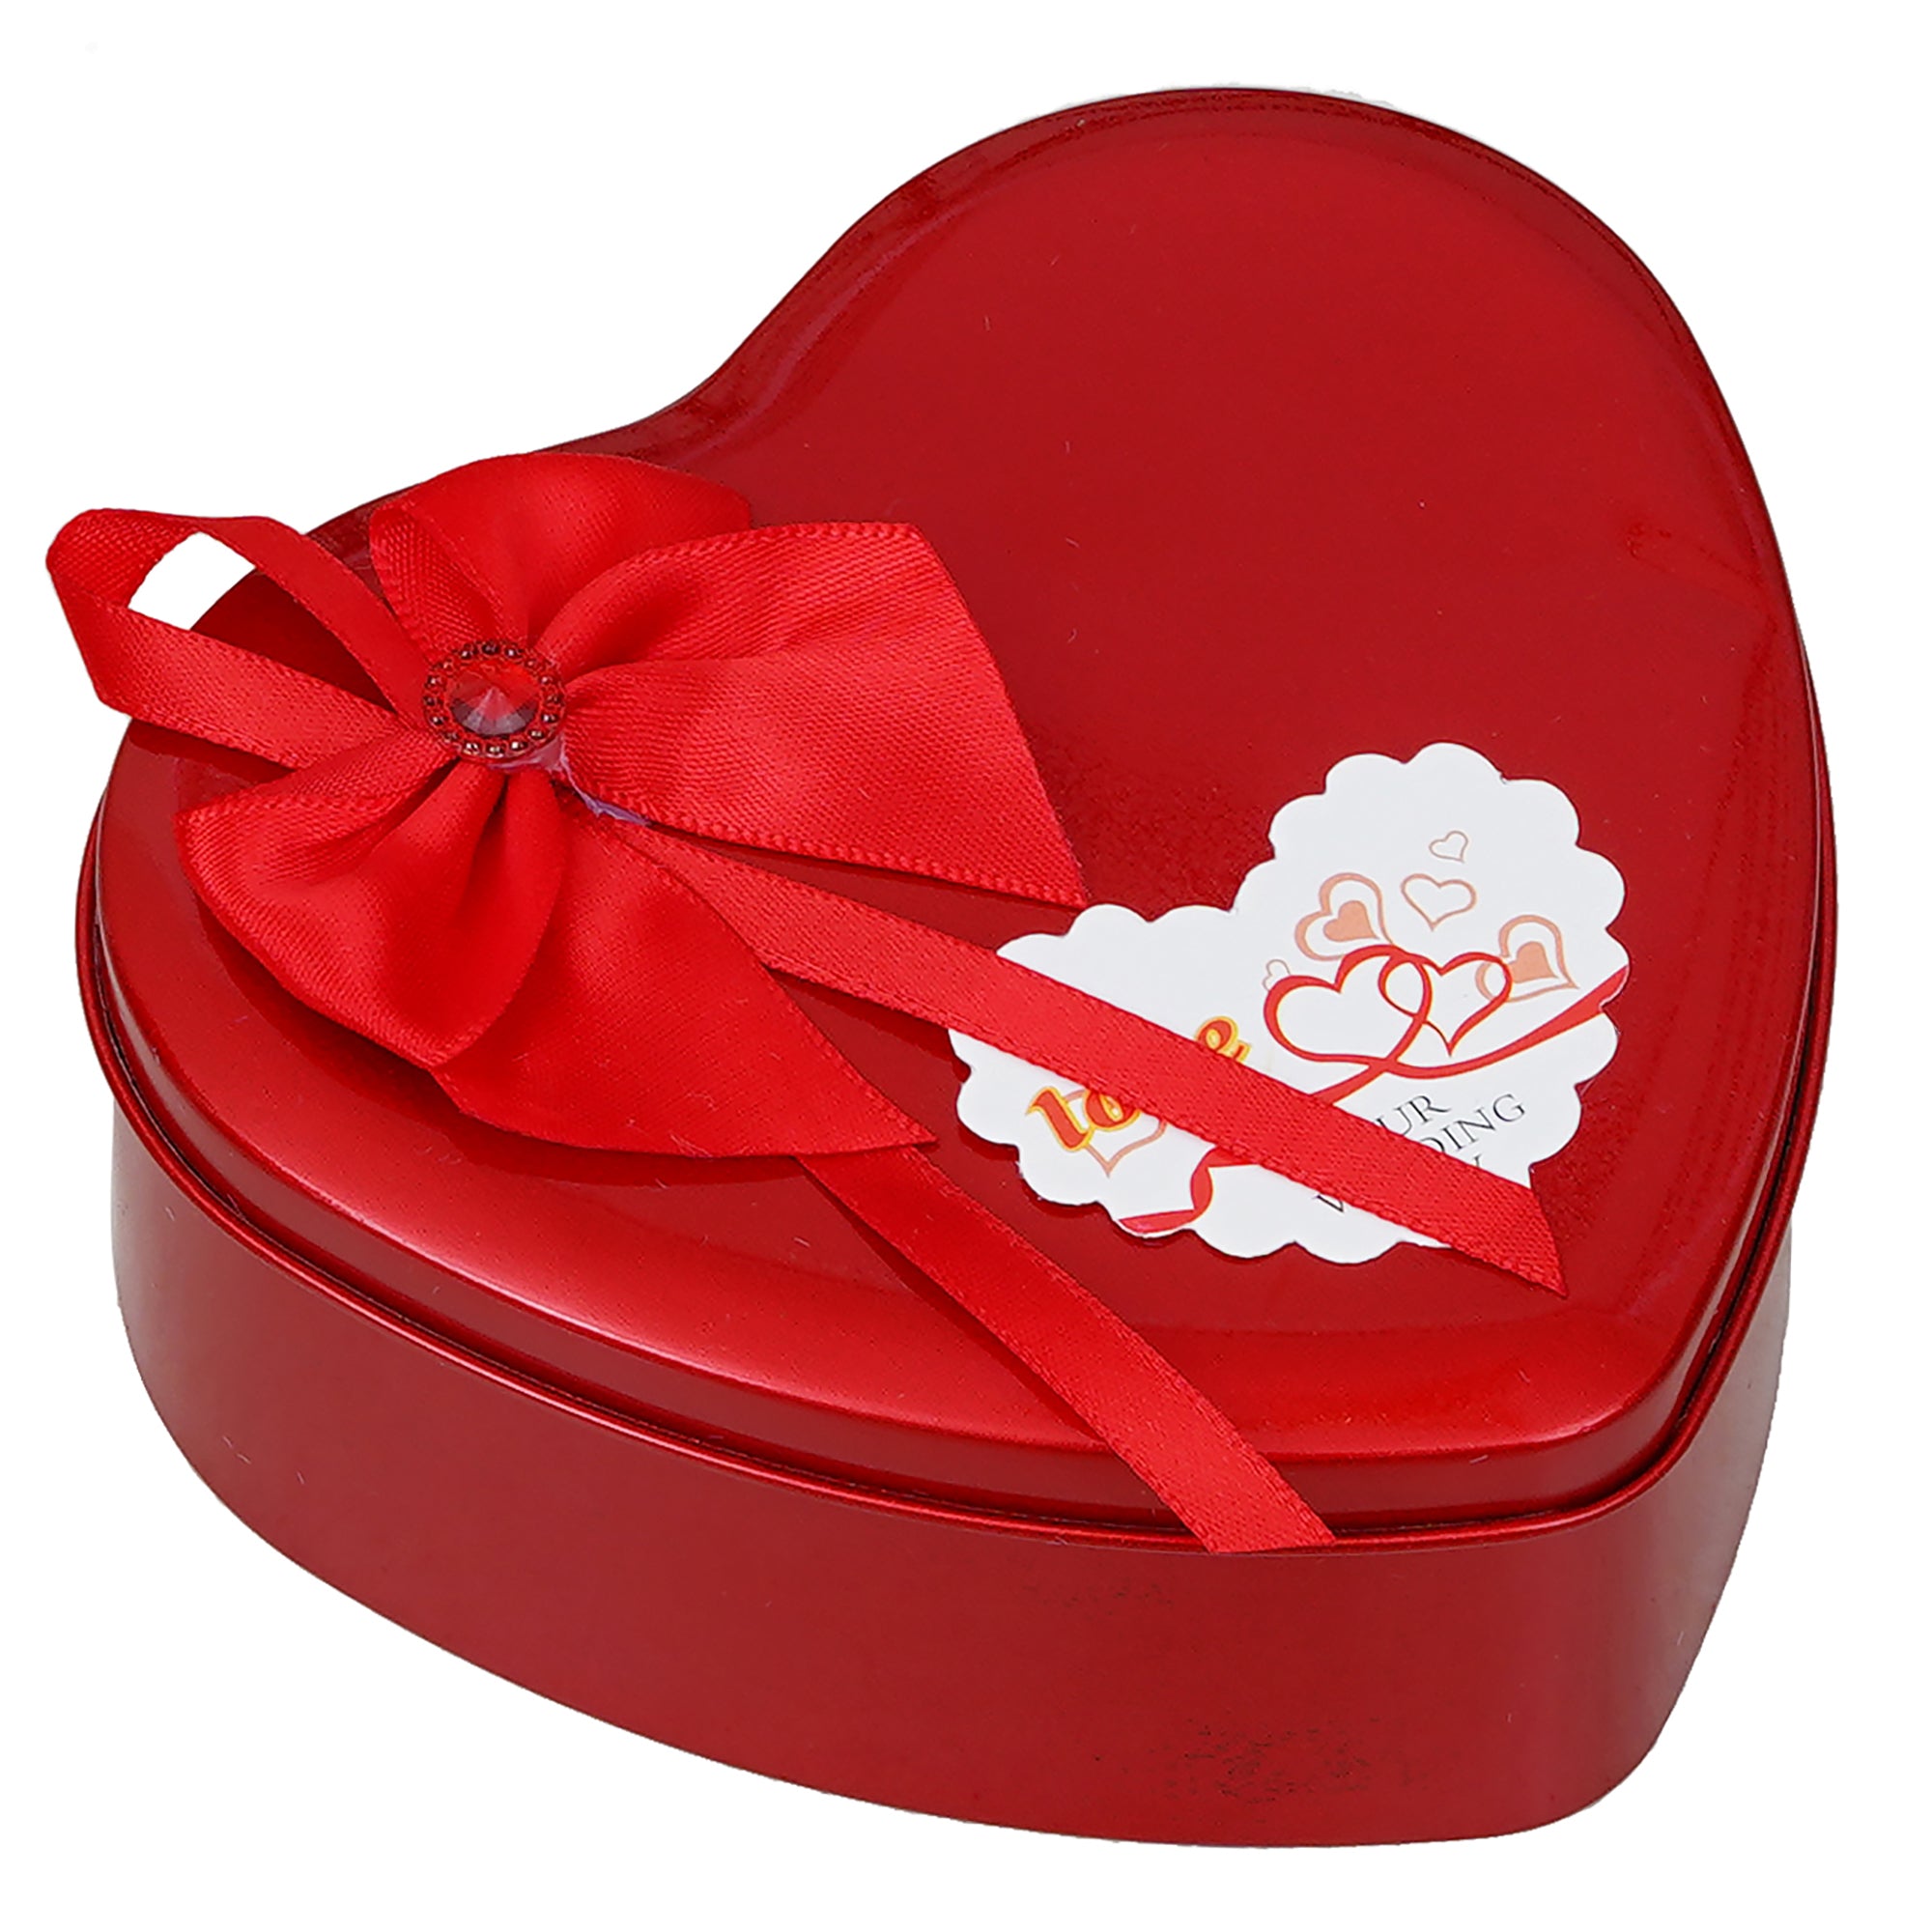 Red Roses and Teddy Bear Valentine's Heart Shaped Gift Box 5